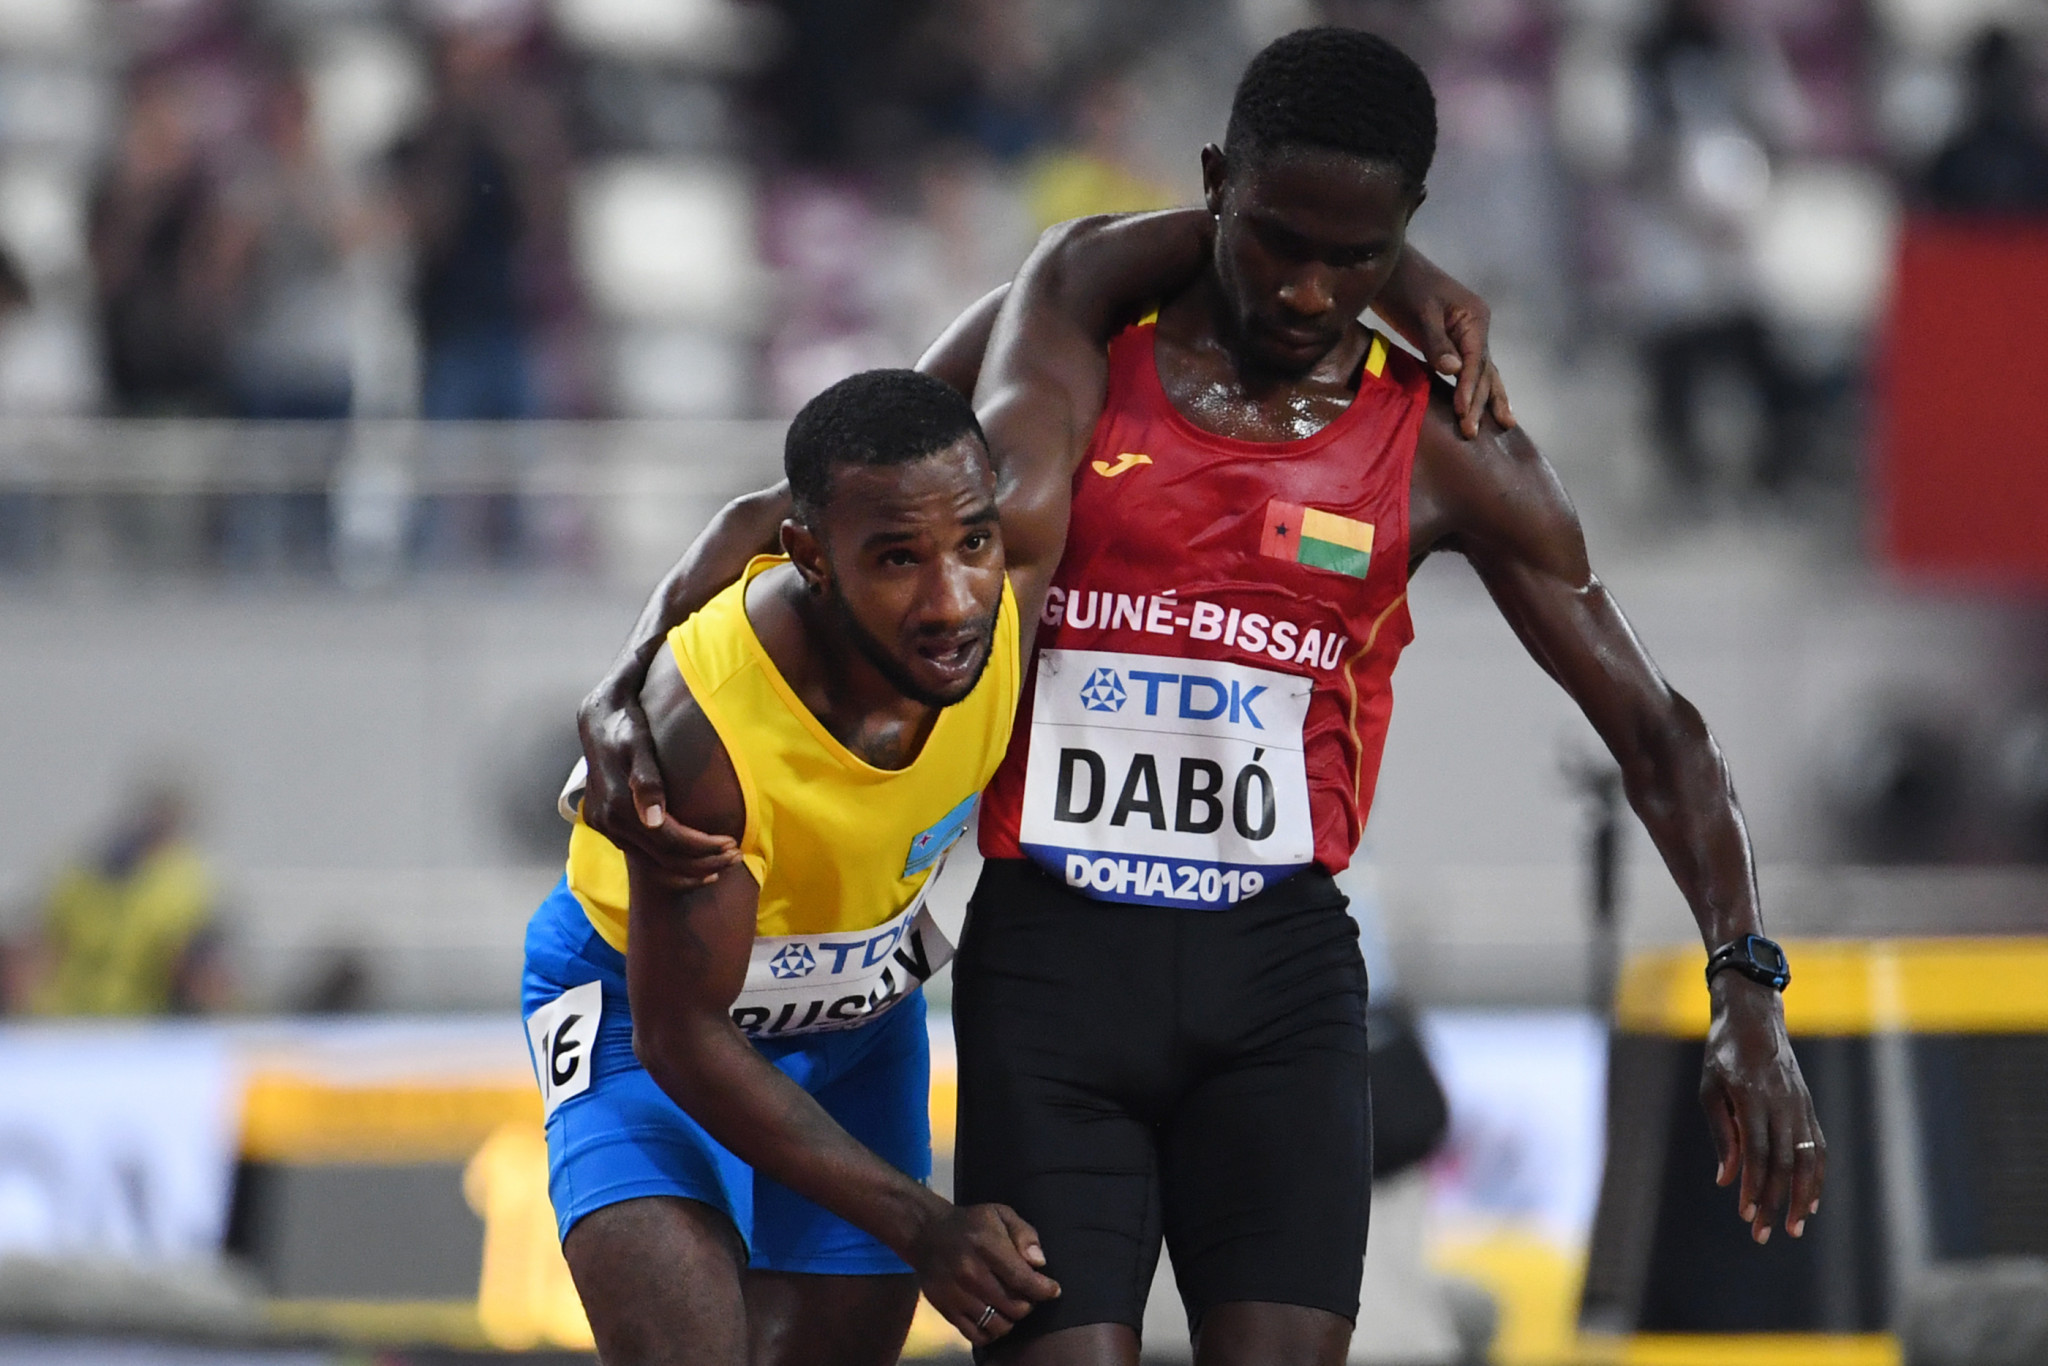 Guinea-Bissau’s Braima Suncar Dabo helped stricken rival, Jonathan Busby of Aruba, cross the finishing line in the 5,000 metres on the opening day of the IAAF World Championships in Doha ©Getty Images 